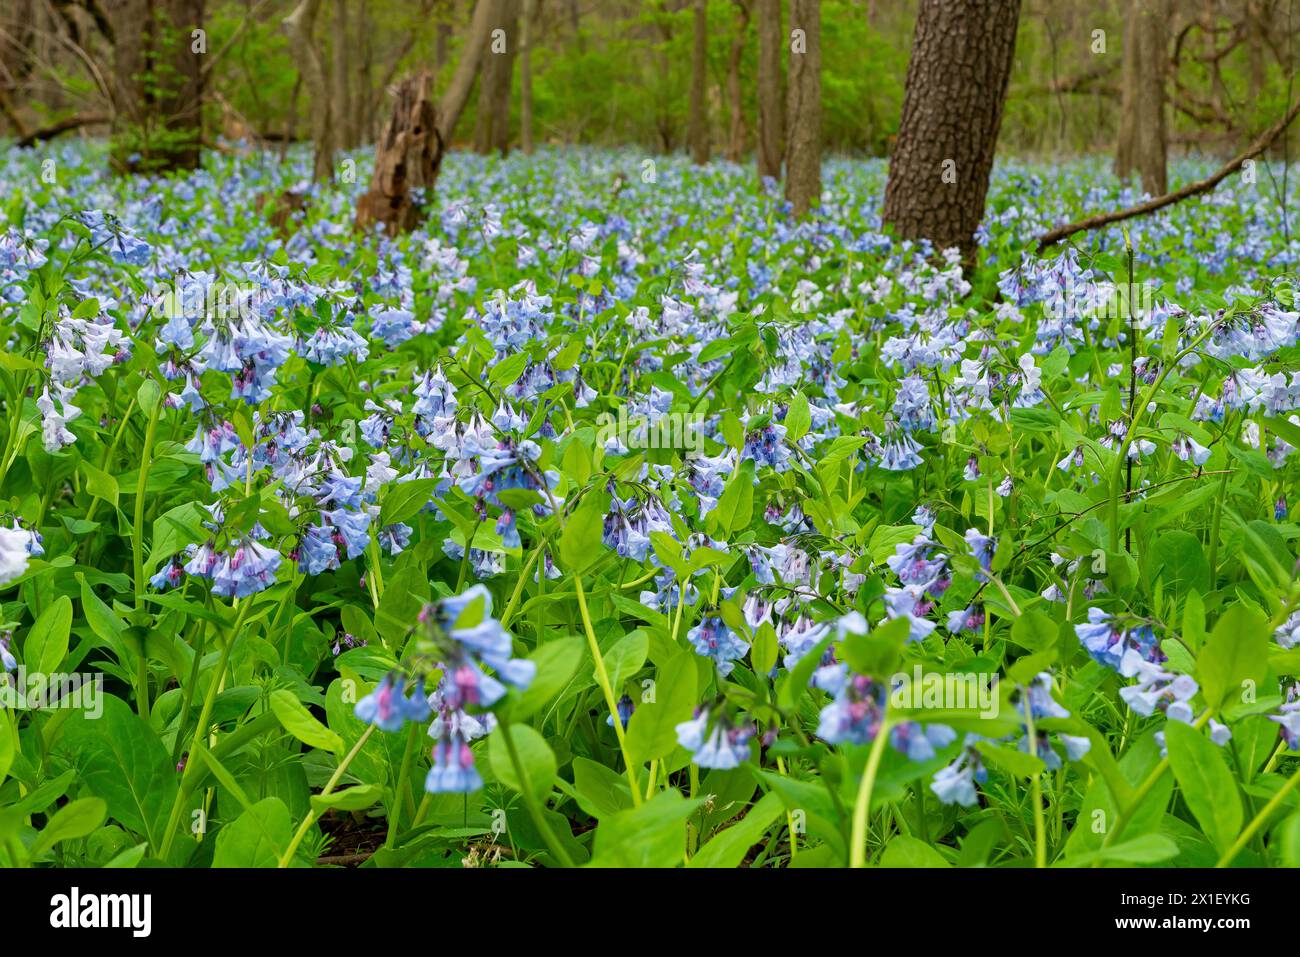 Spring bluebells in Illinois Canyon at Starved Rock State Park, Illinois, USA. Stock Photo